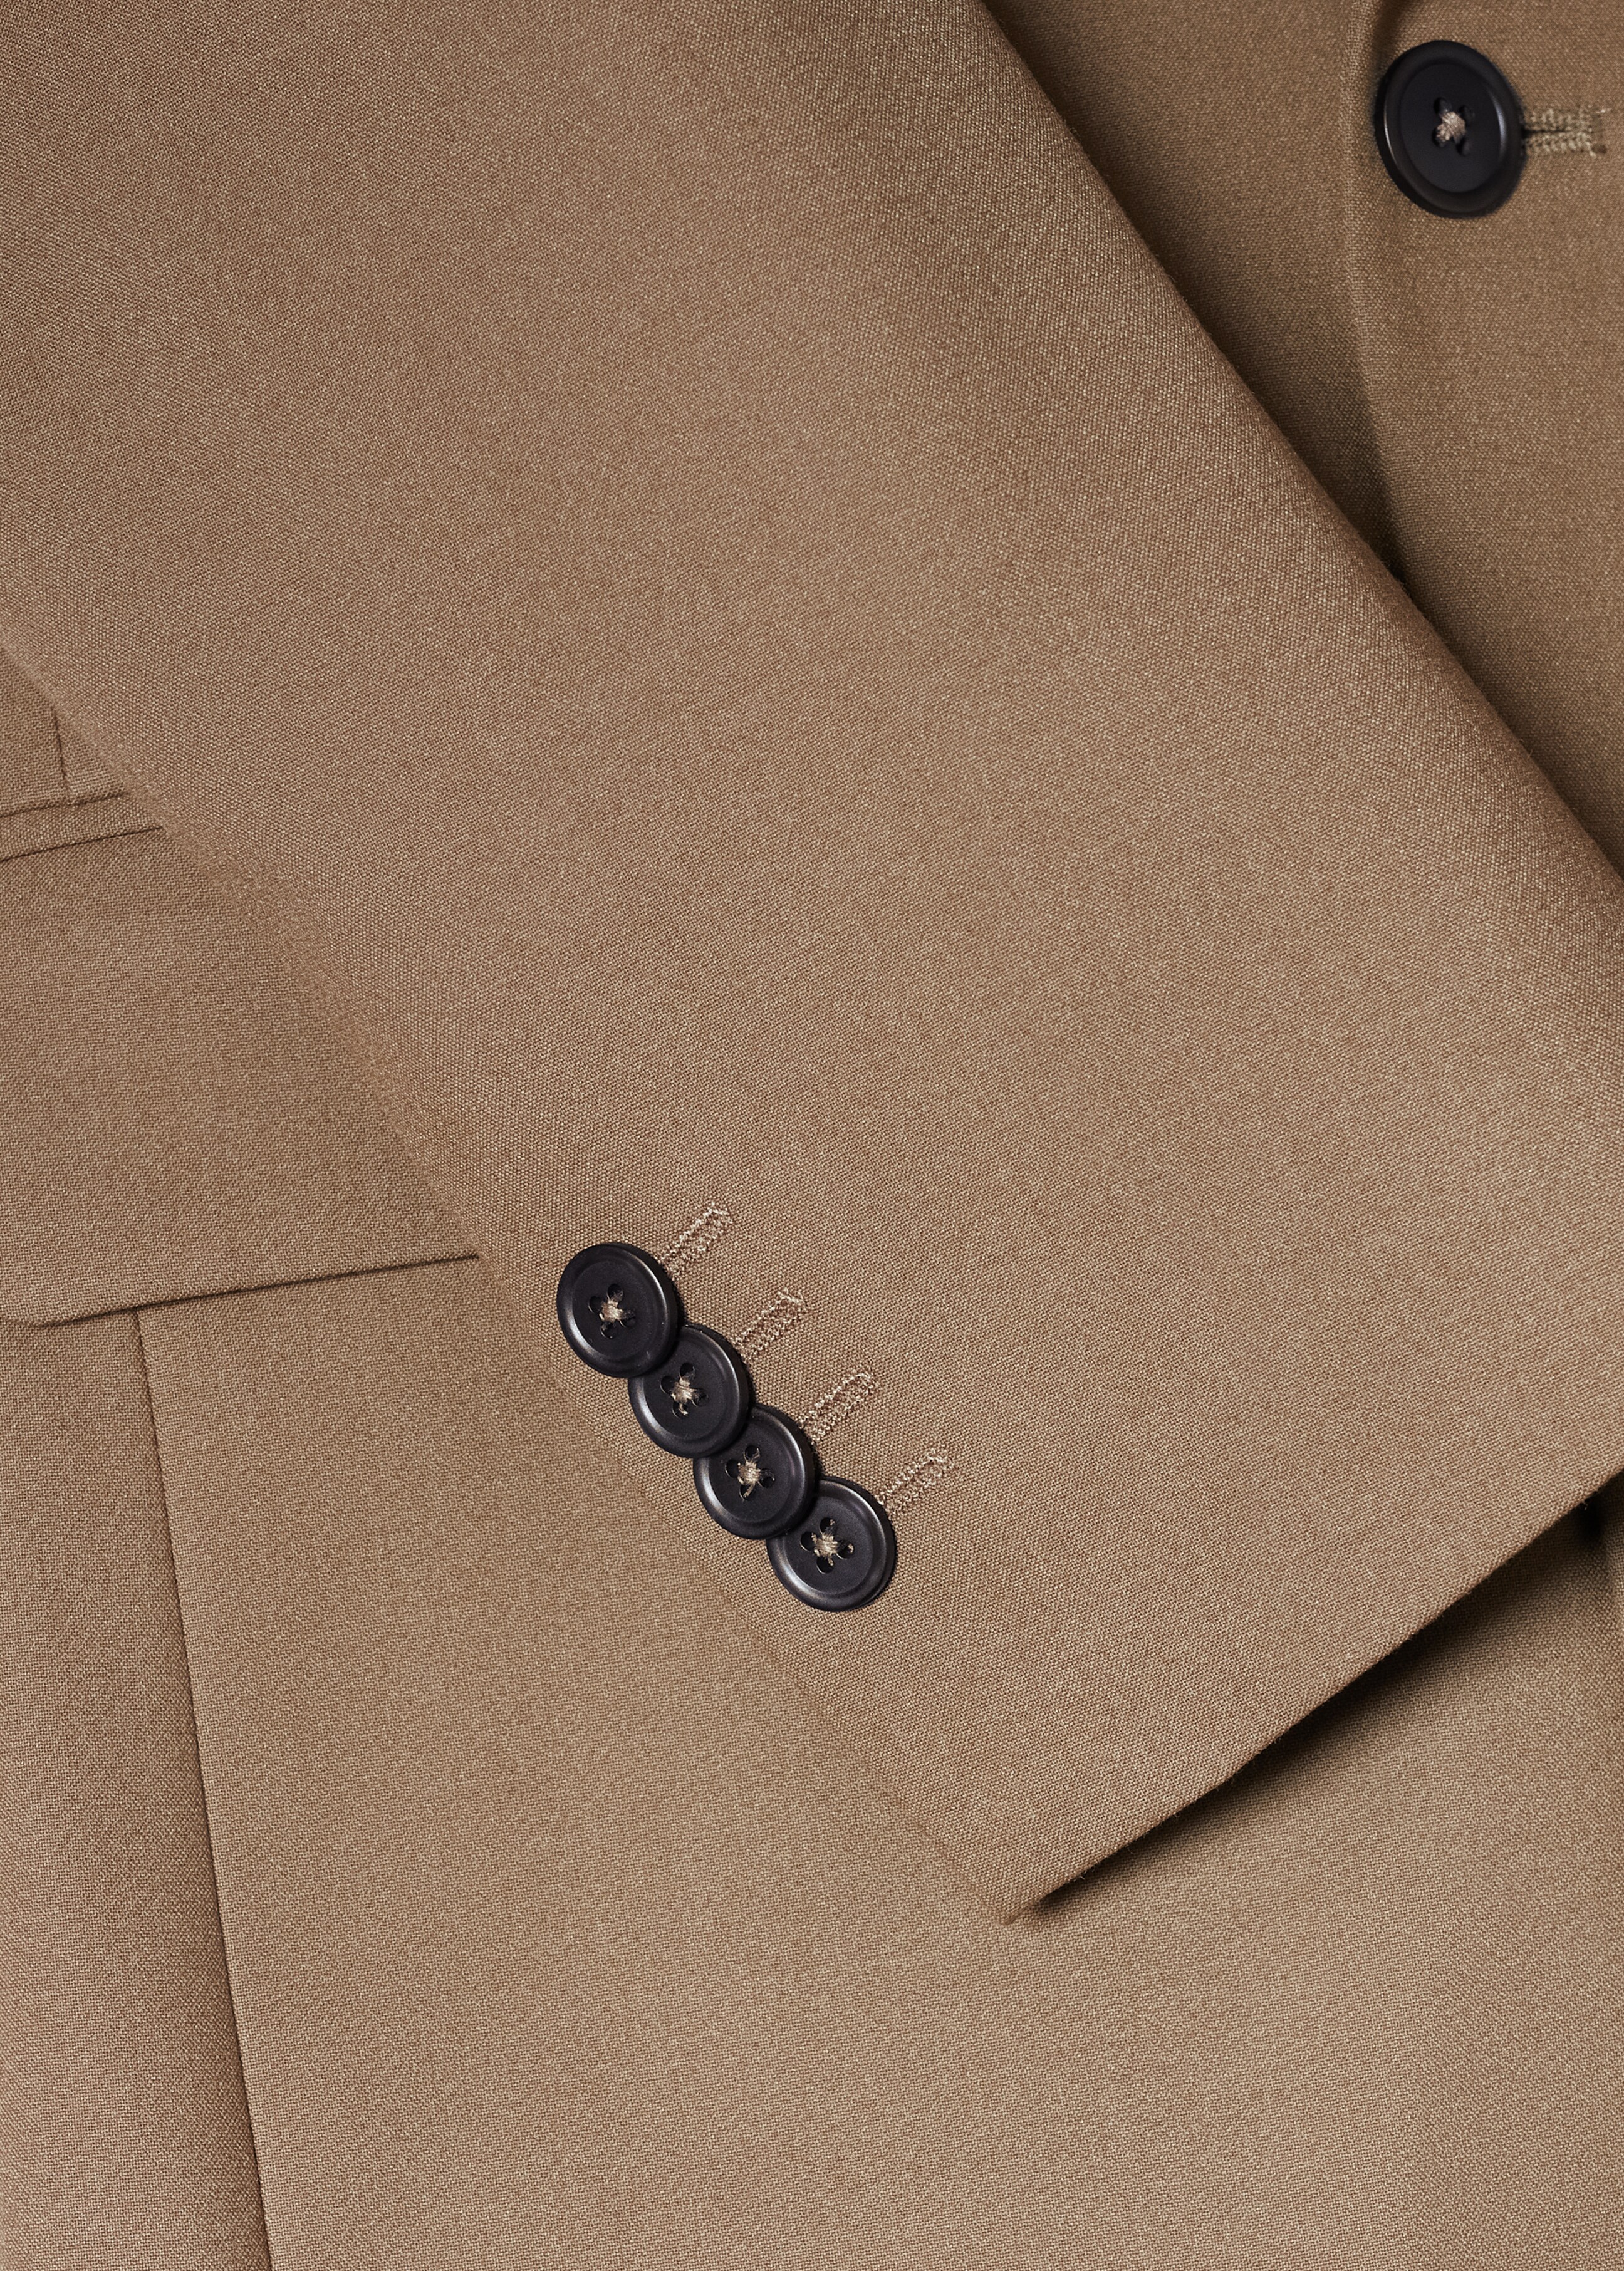 Double-breasted suit jacket - Details of the article 0